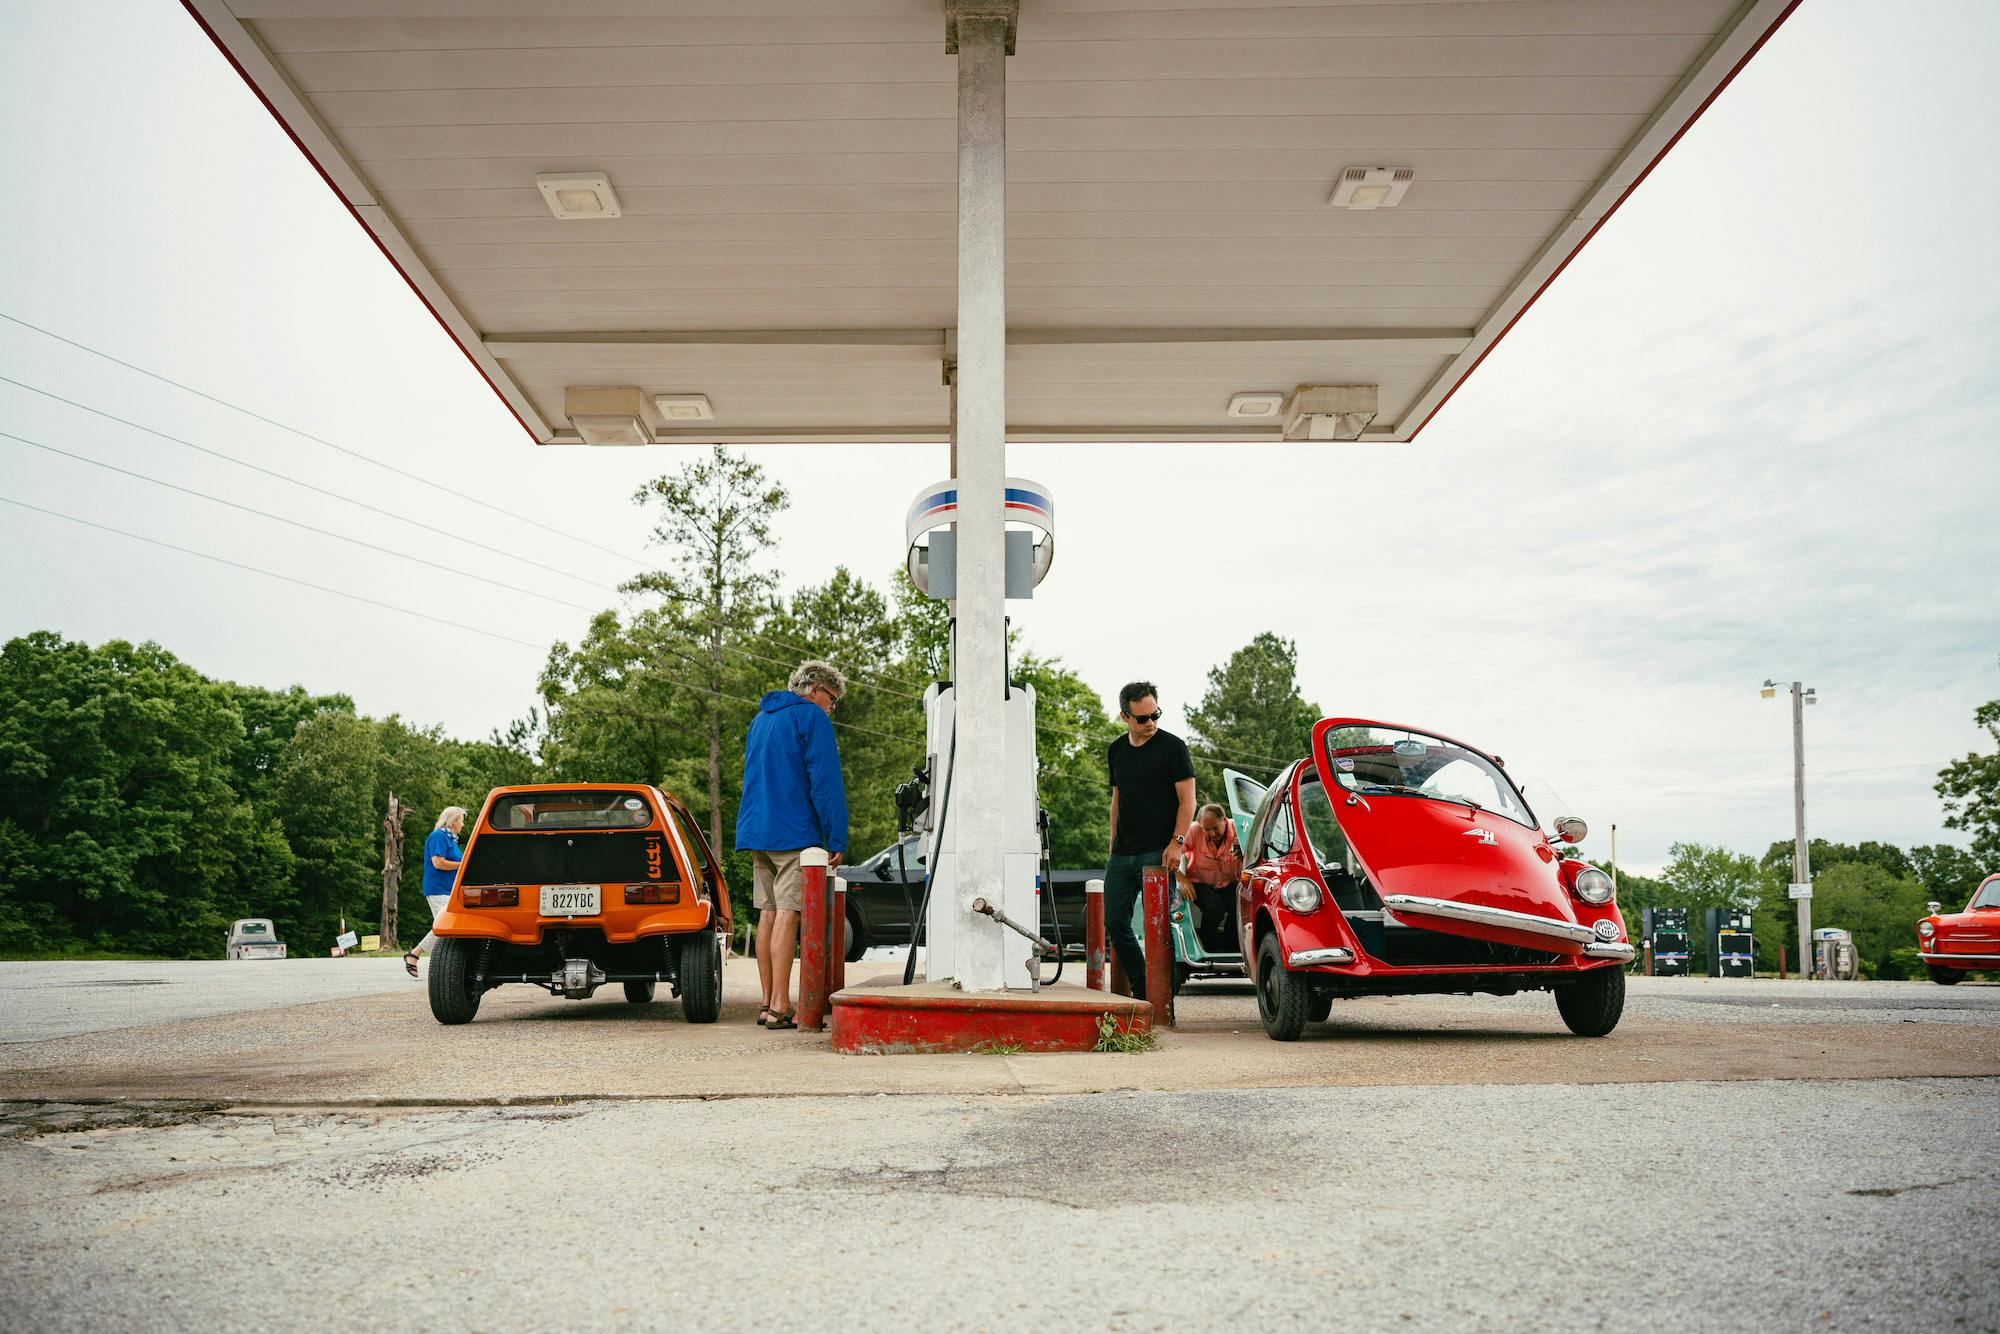 Microcars fueling up at gas station